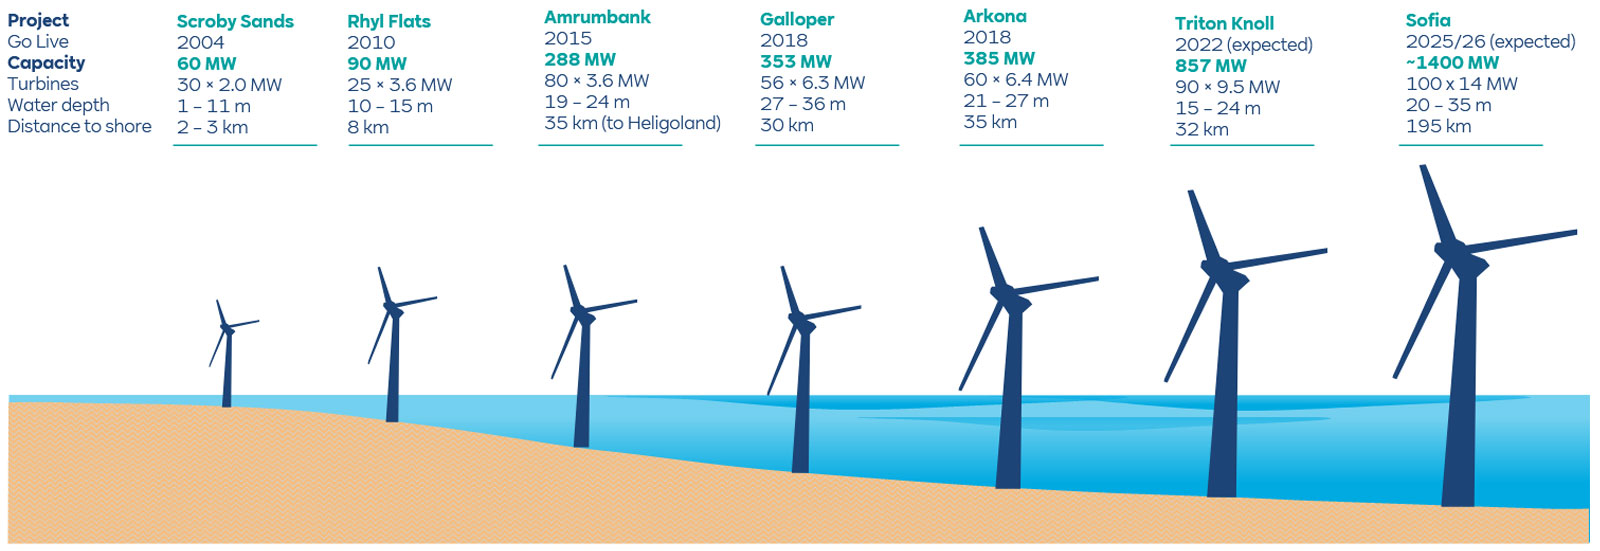 Offshore wind farm evolution at RWE from 2004 to 2026 